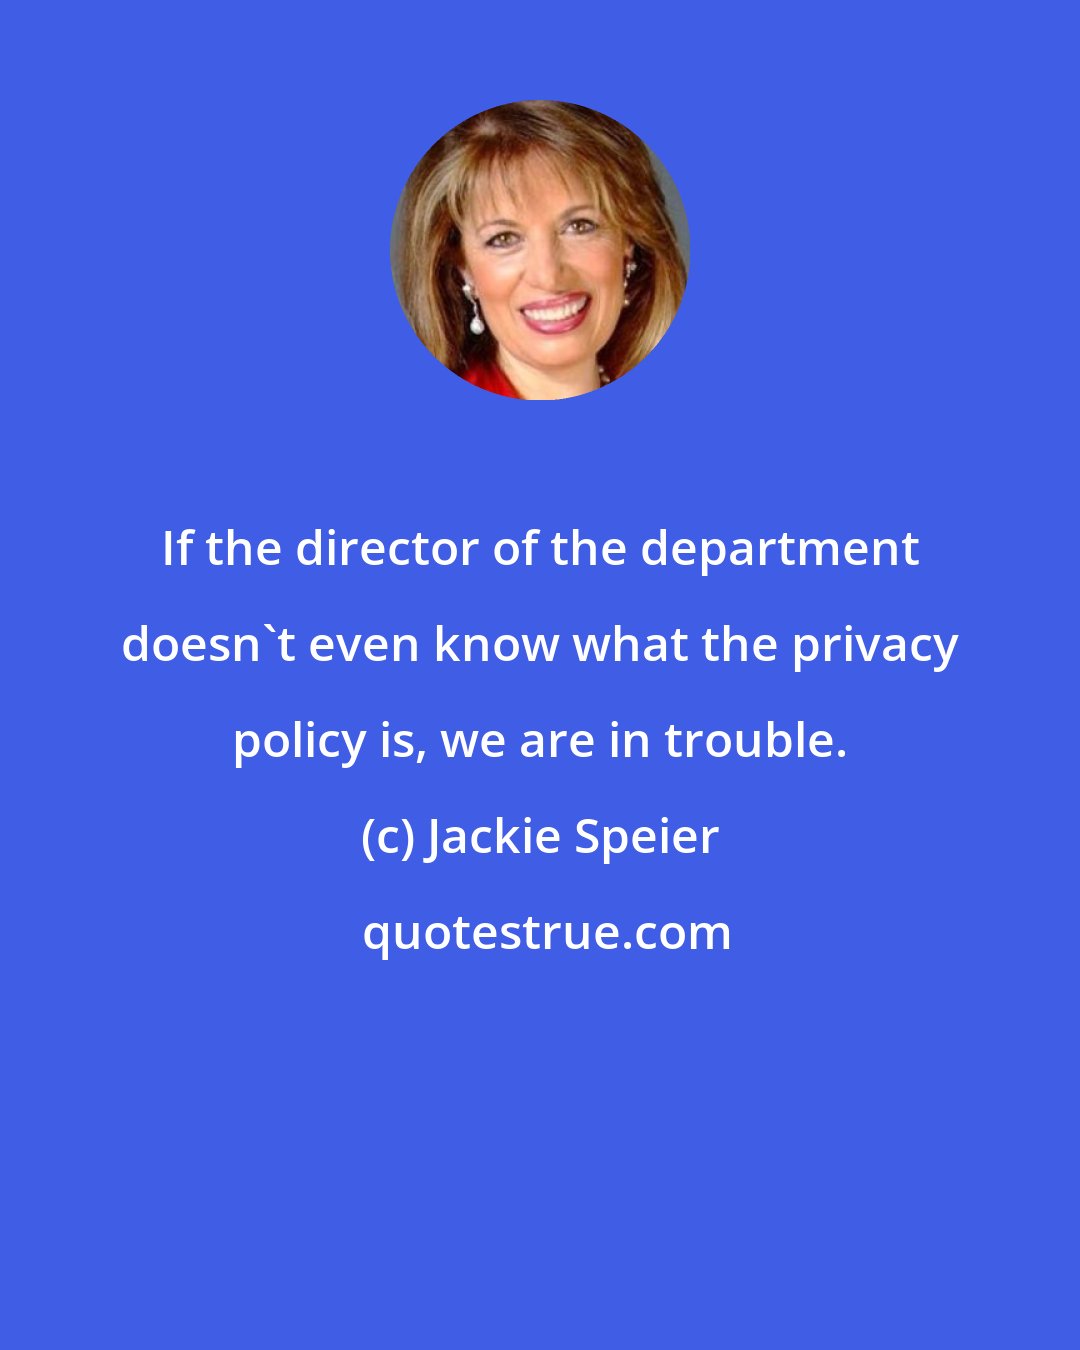 Jackie Speier: If the director of the department doesn't even know what the privacy policy is, we are in trouble.